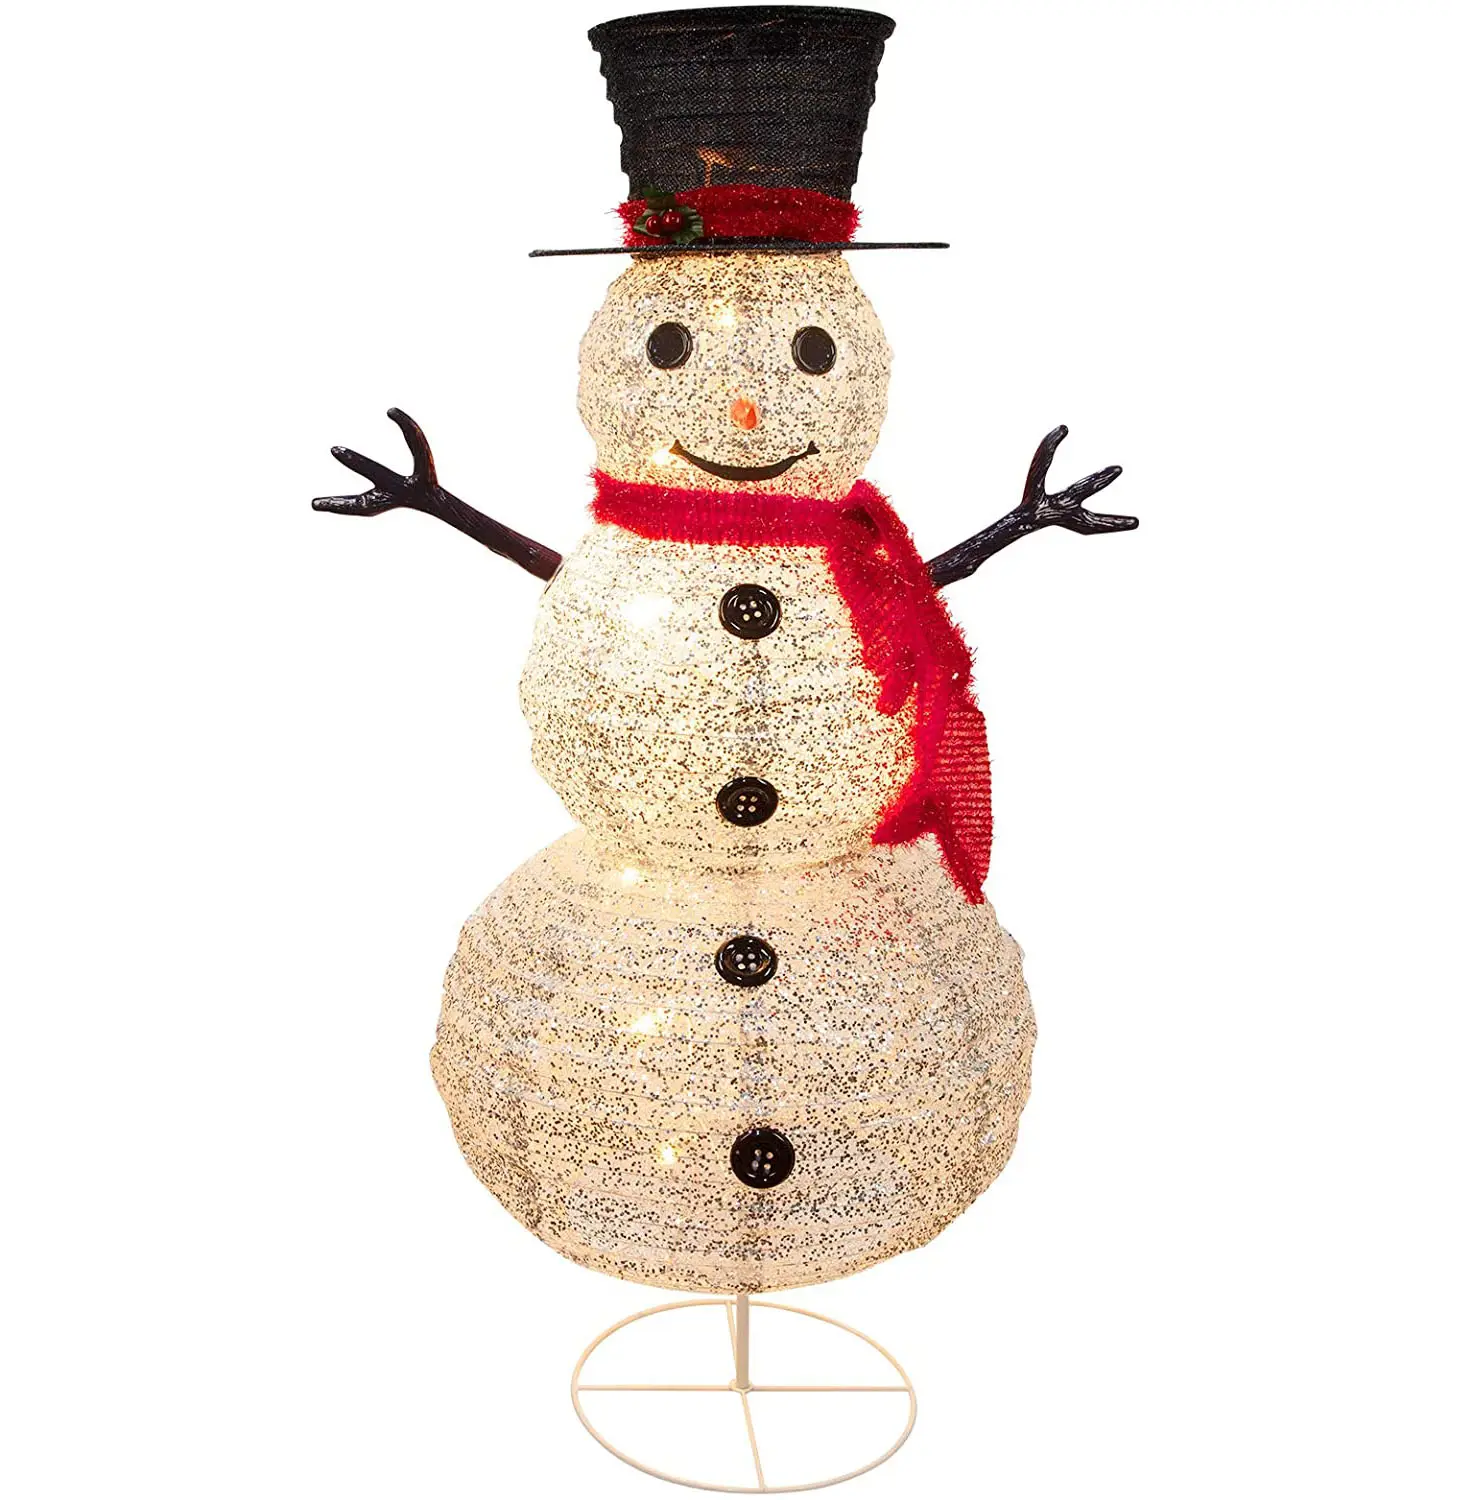 Nicro Christmas Waterproof Tinsel Led Outside Snowman Lighted Garden Outdoor Giant Outdoor Inflatable Decorations Lantern